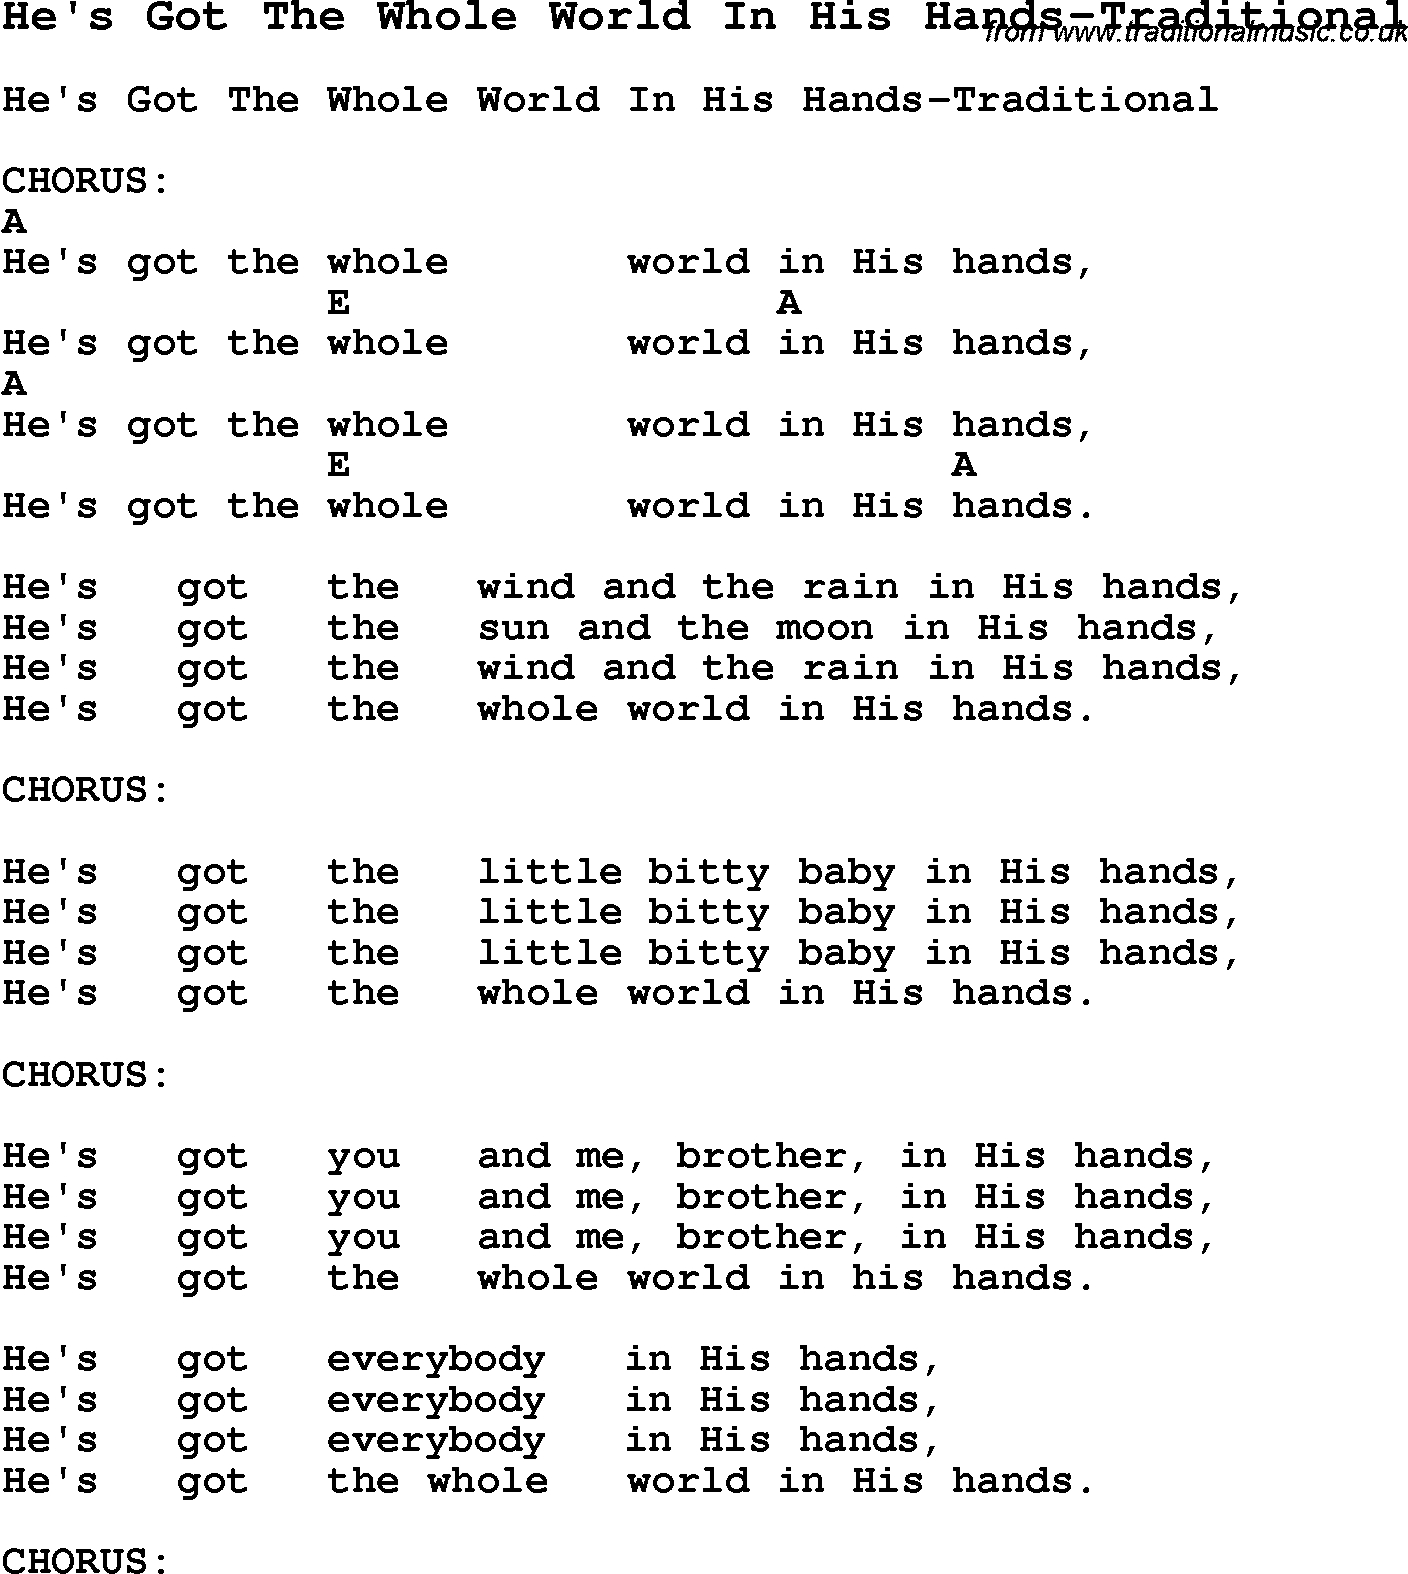 A Whole New World Chords Summer Camp Song Hes Got The Whole World In His Hands Traditional